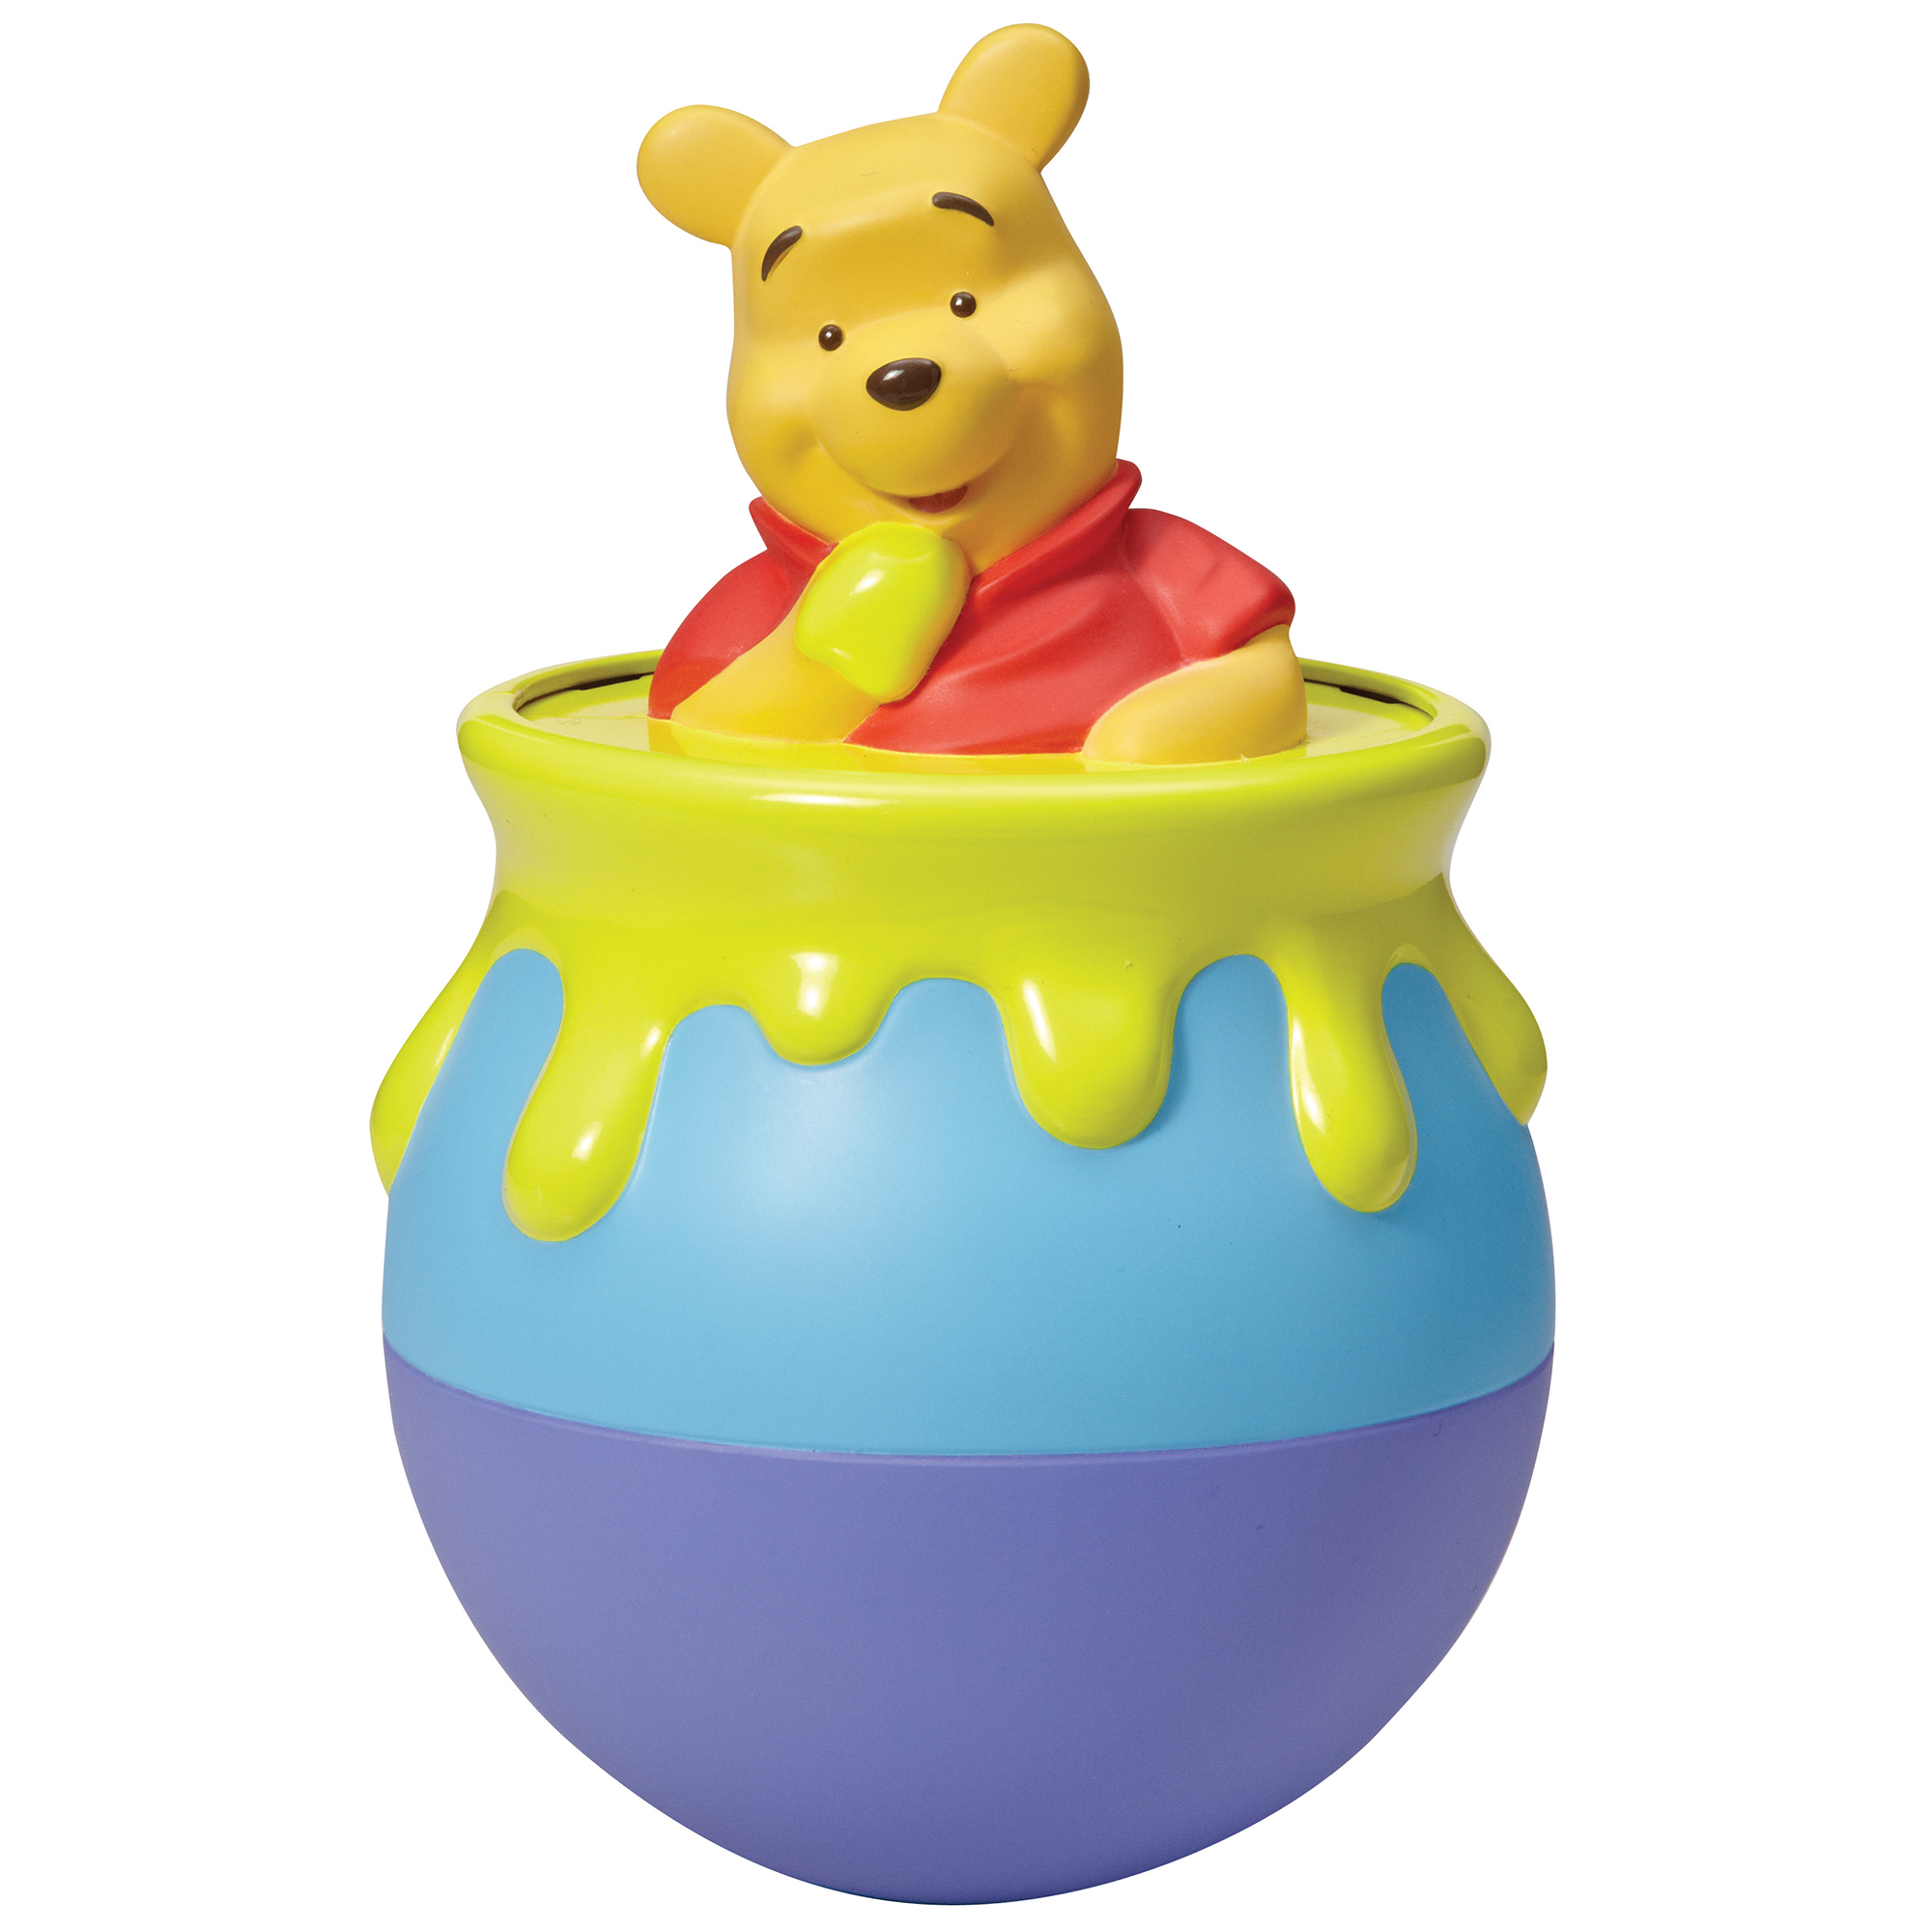 Winnie the Pooh Roly Poly Pooh